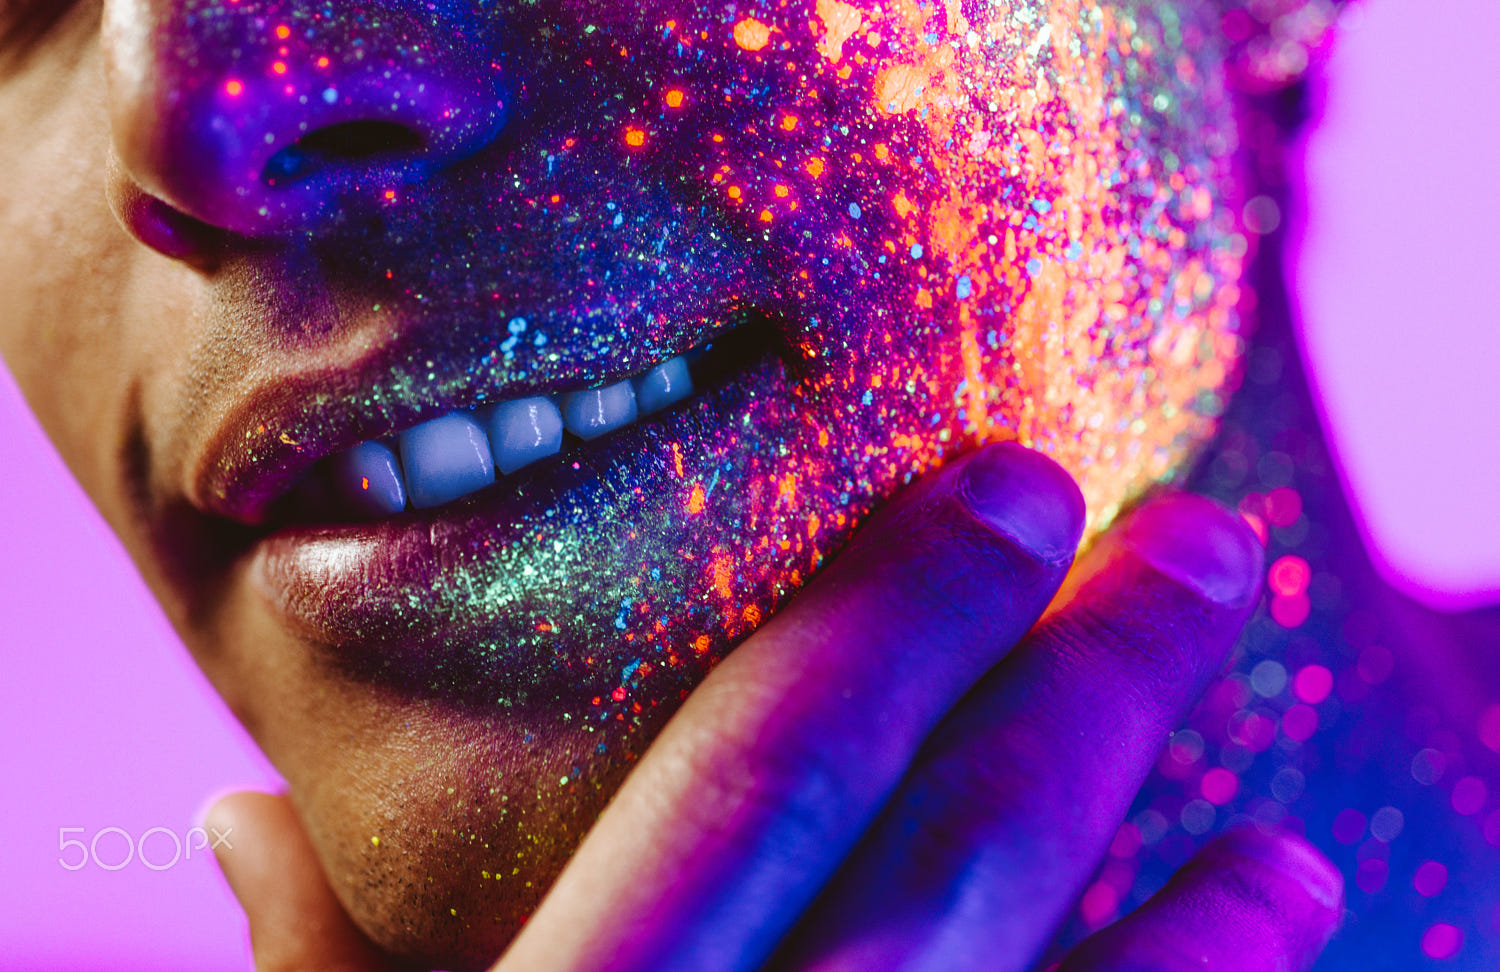 Fluo Portraits With An Handsome Model By Cristian Negroni 500px